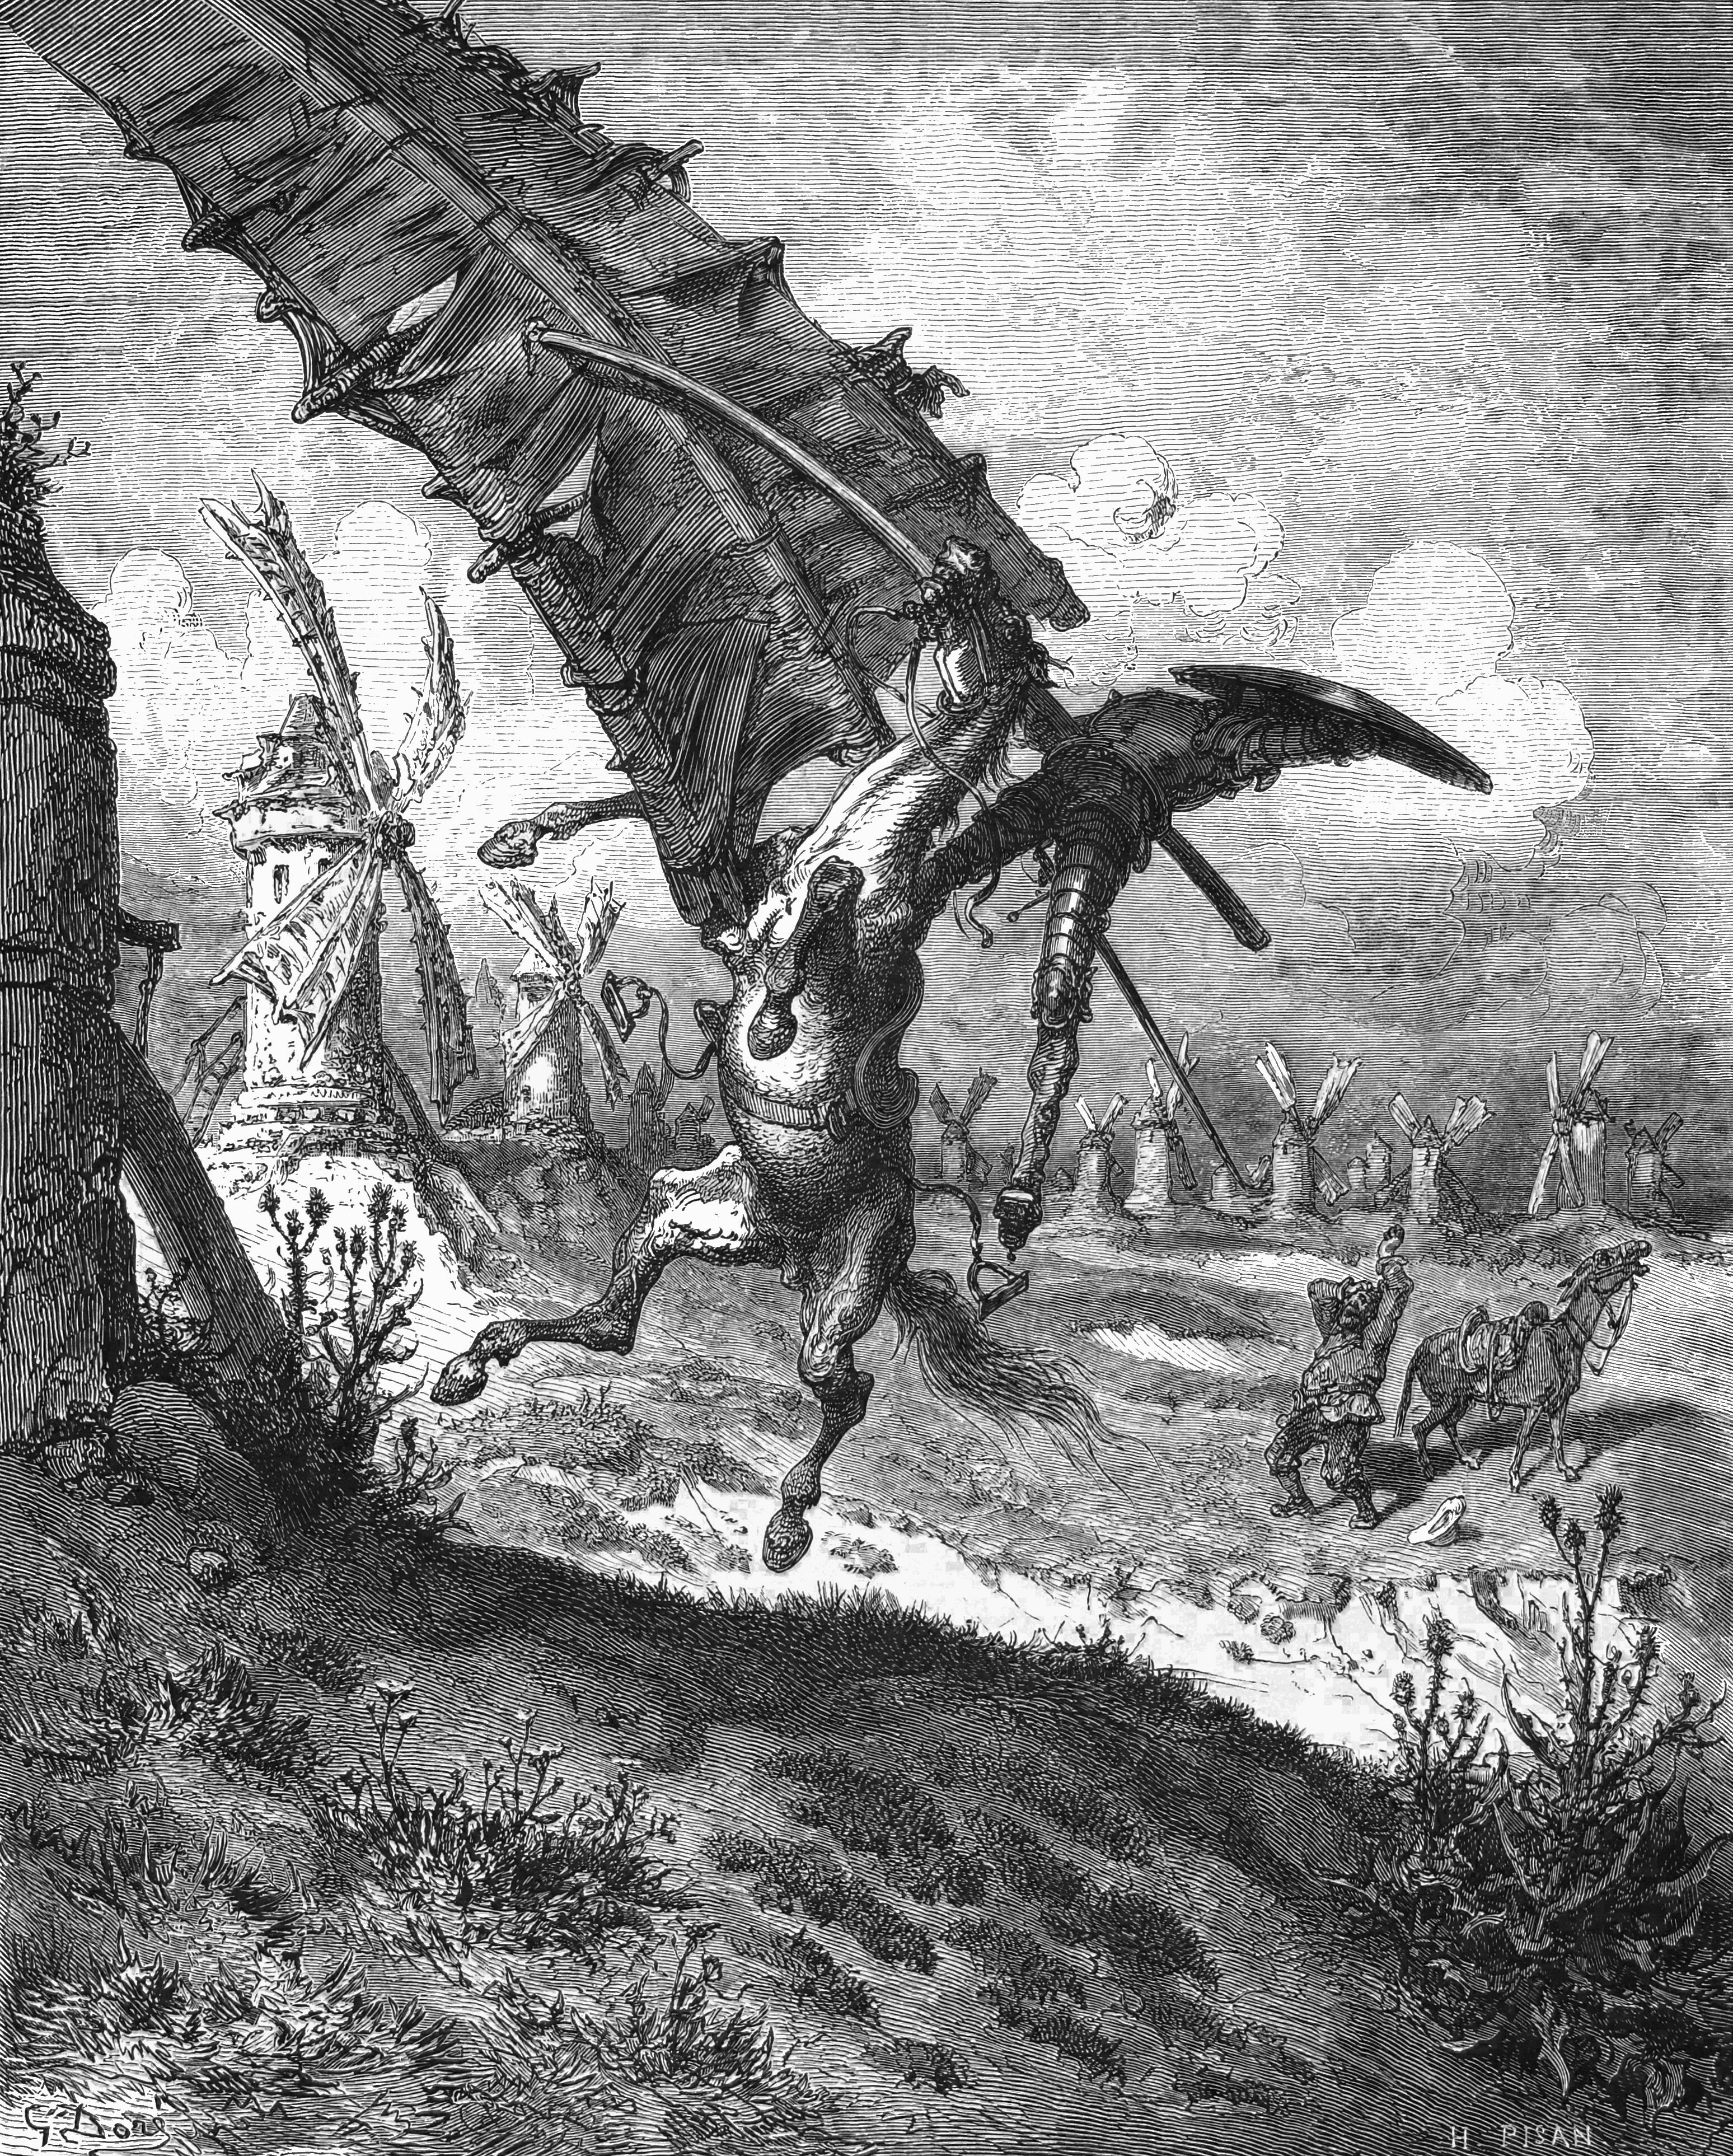 https://upload.wikimedia.org/wikipedia/commons/4/4d/Don_Quijote_Illustration_by_Gustave_Dore_VII.jpg